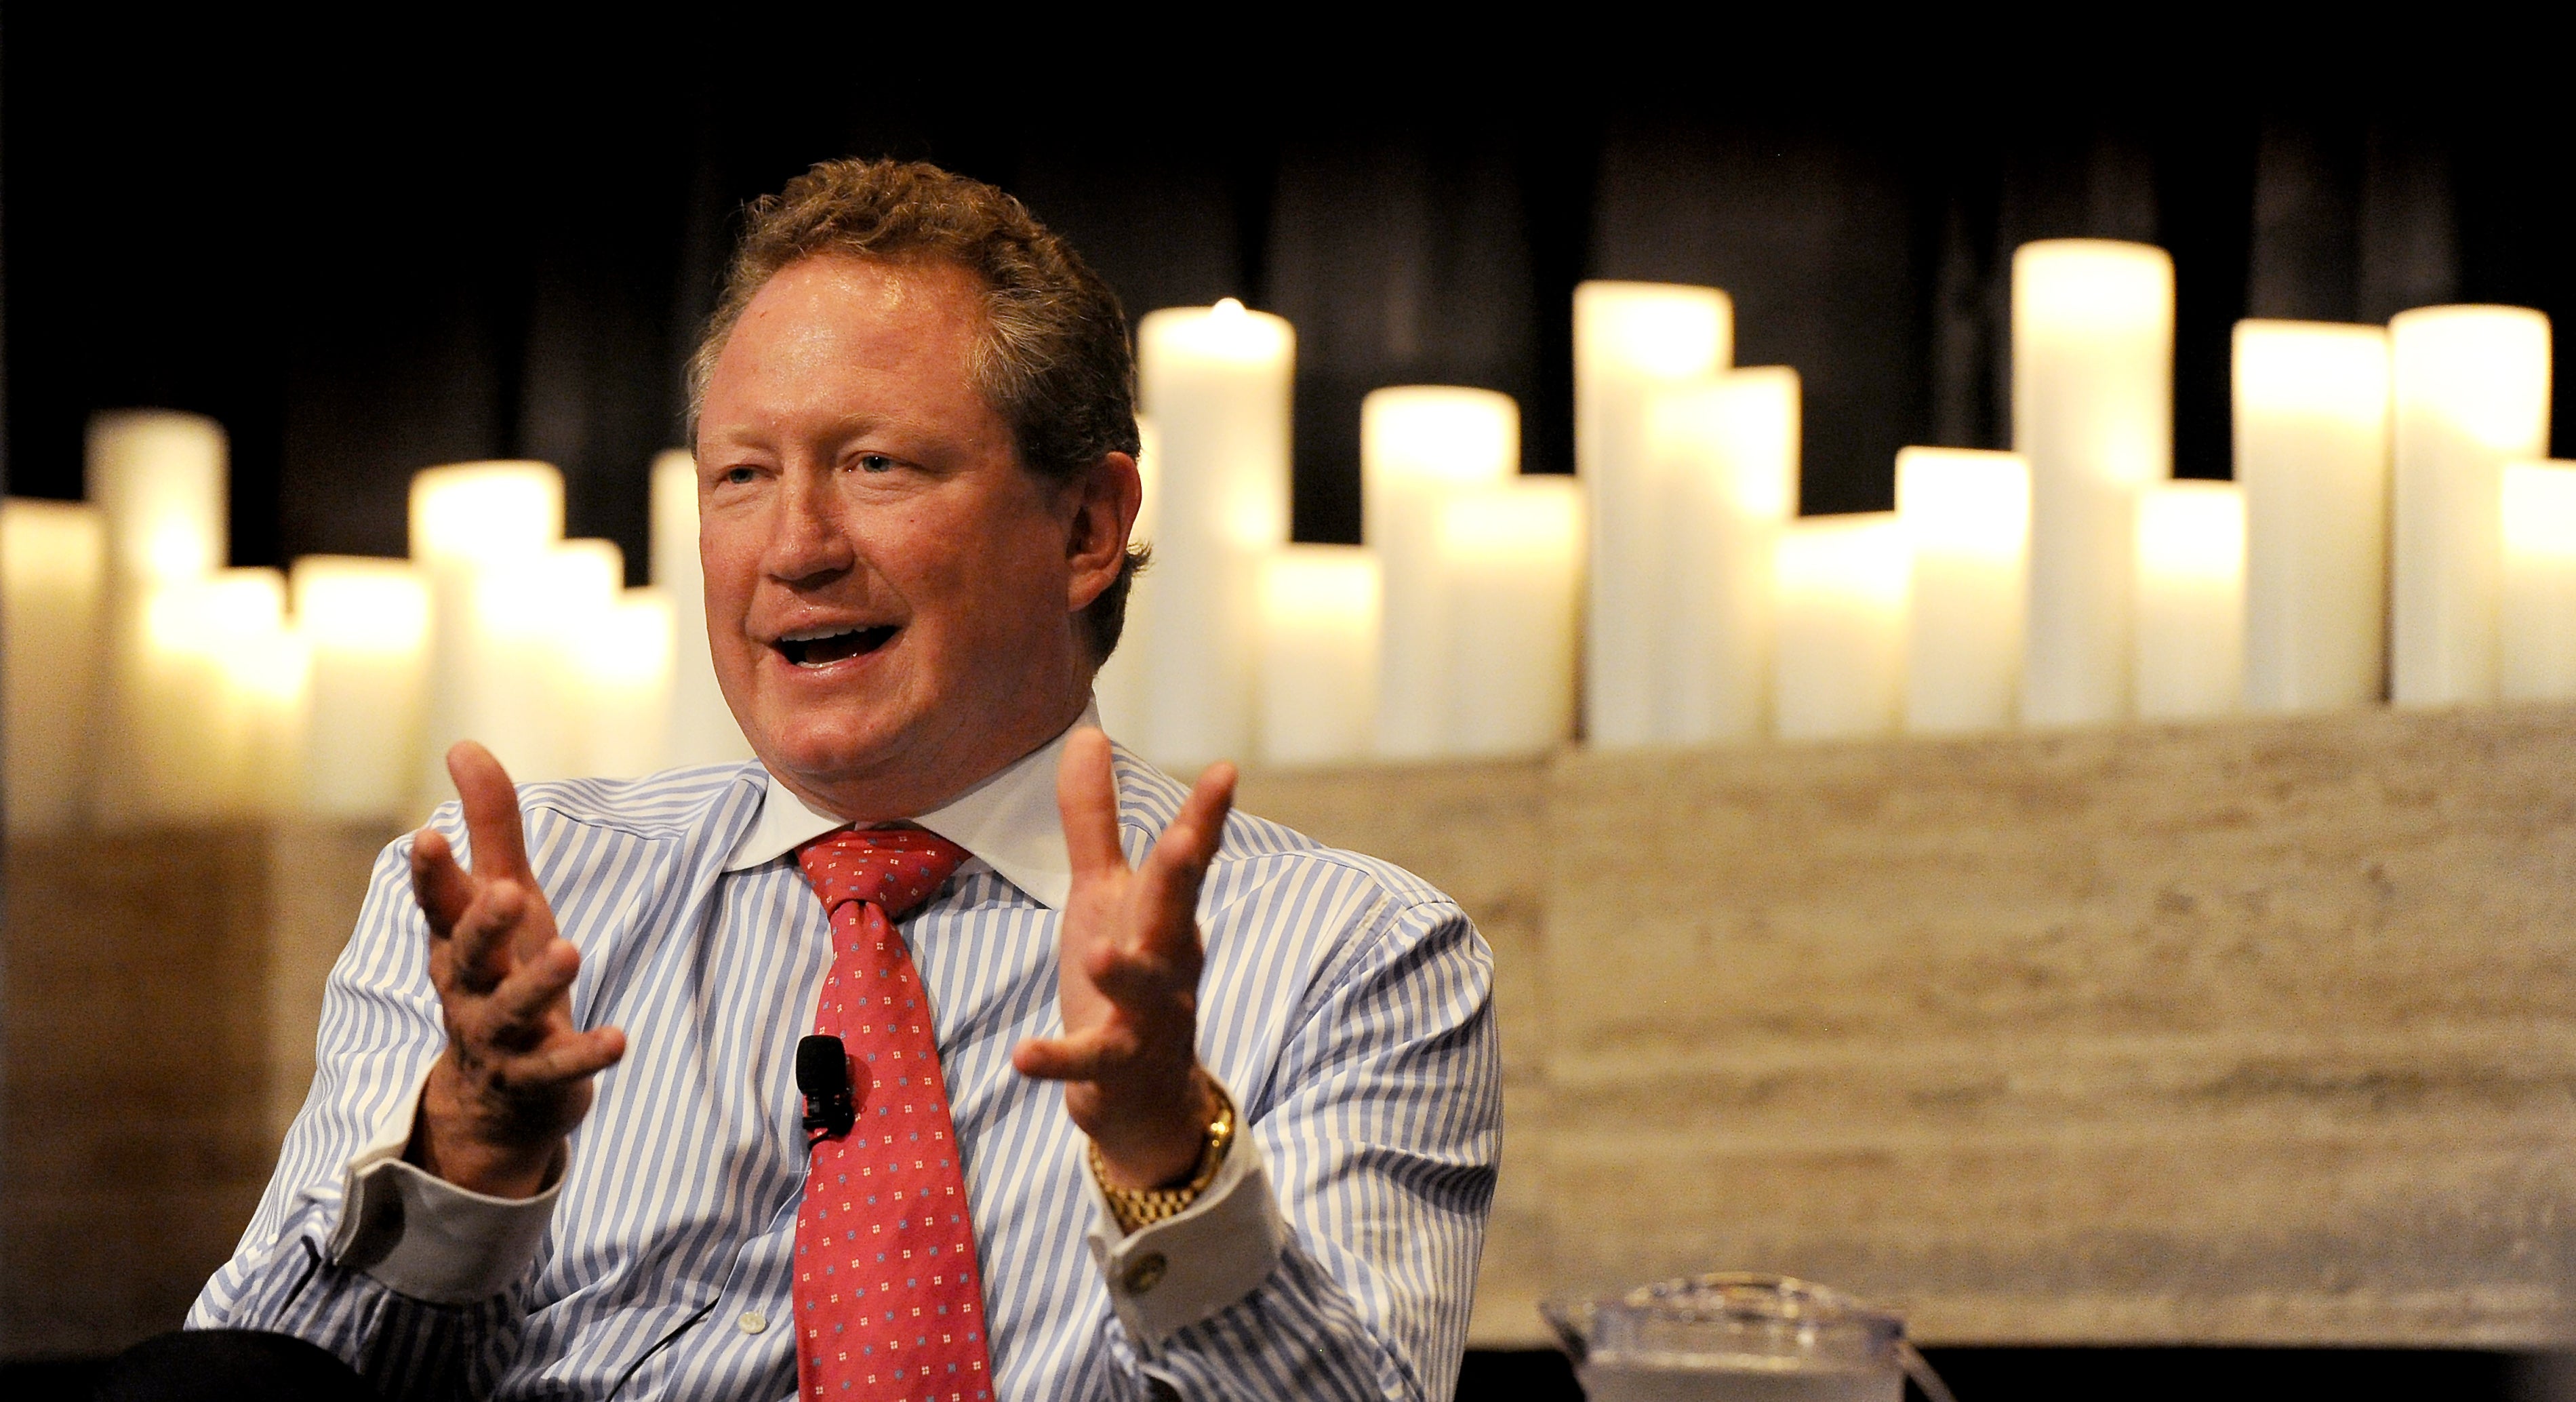 Mining billionaire Andrew ‘Twiggy’ Forrest speaks during a business luncheon in Sydney on April 17, 2012